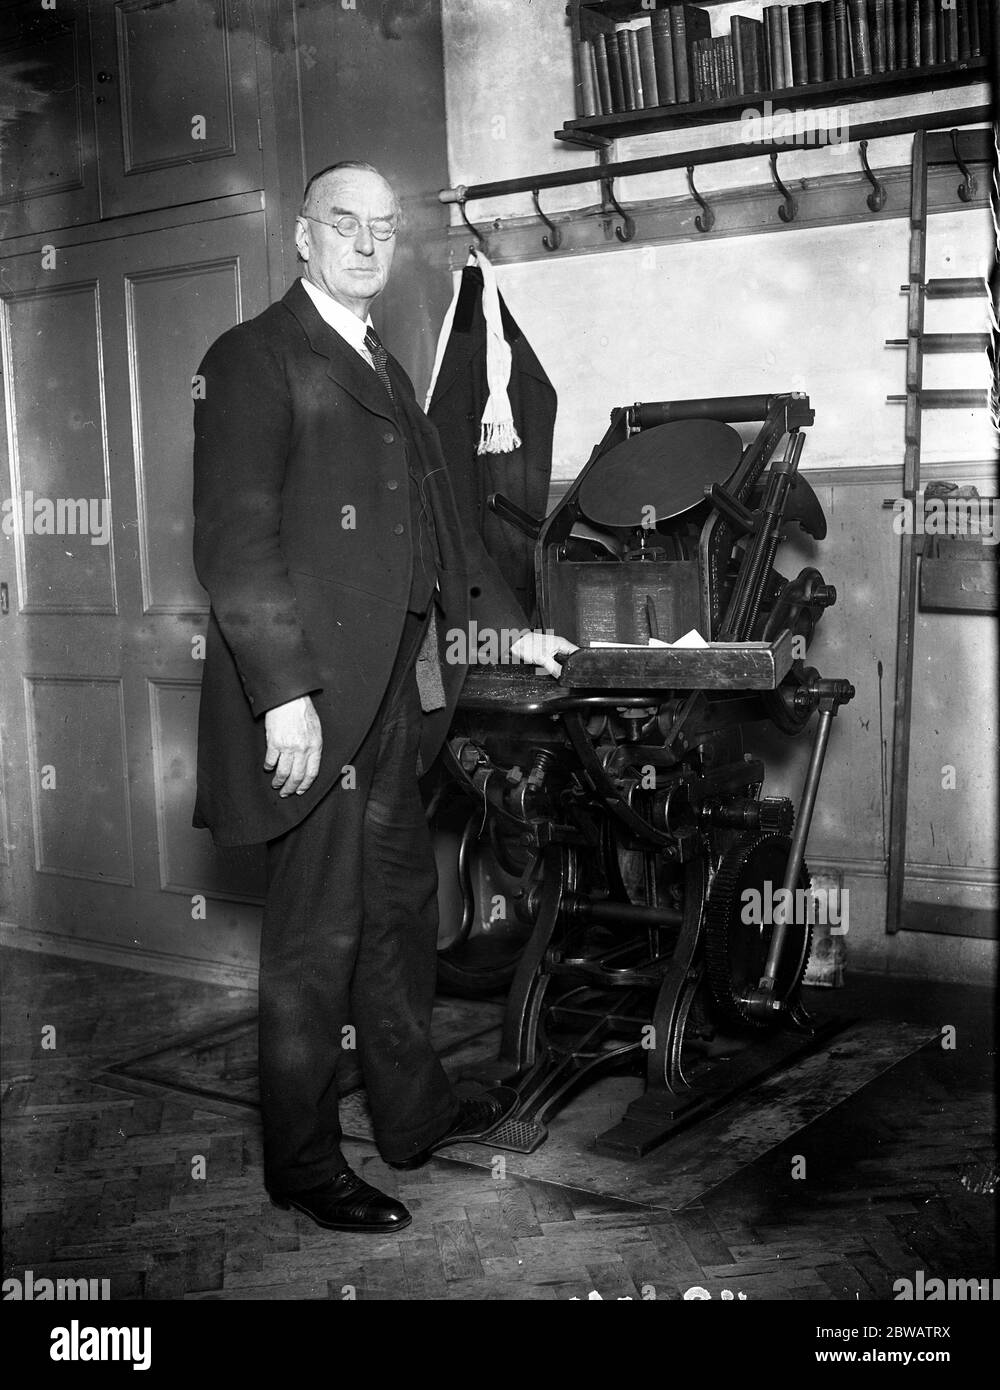 The Rector as Printer . The Reverend Dr Geikie Cobb , Rector of St Ethelburgas , Bishopsgate , has a flourishing guild of arts and crafts with a fully equipped printing press and book bindery . He is seen here with the printing press . 25th January 1923 Stock Photo